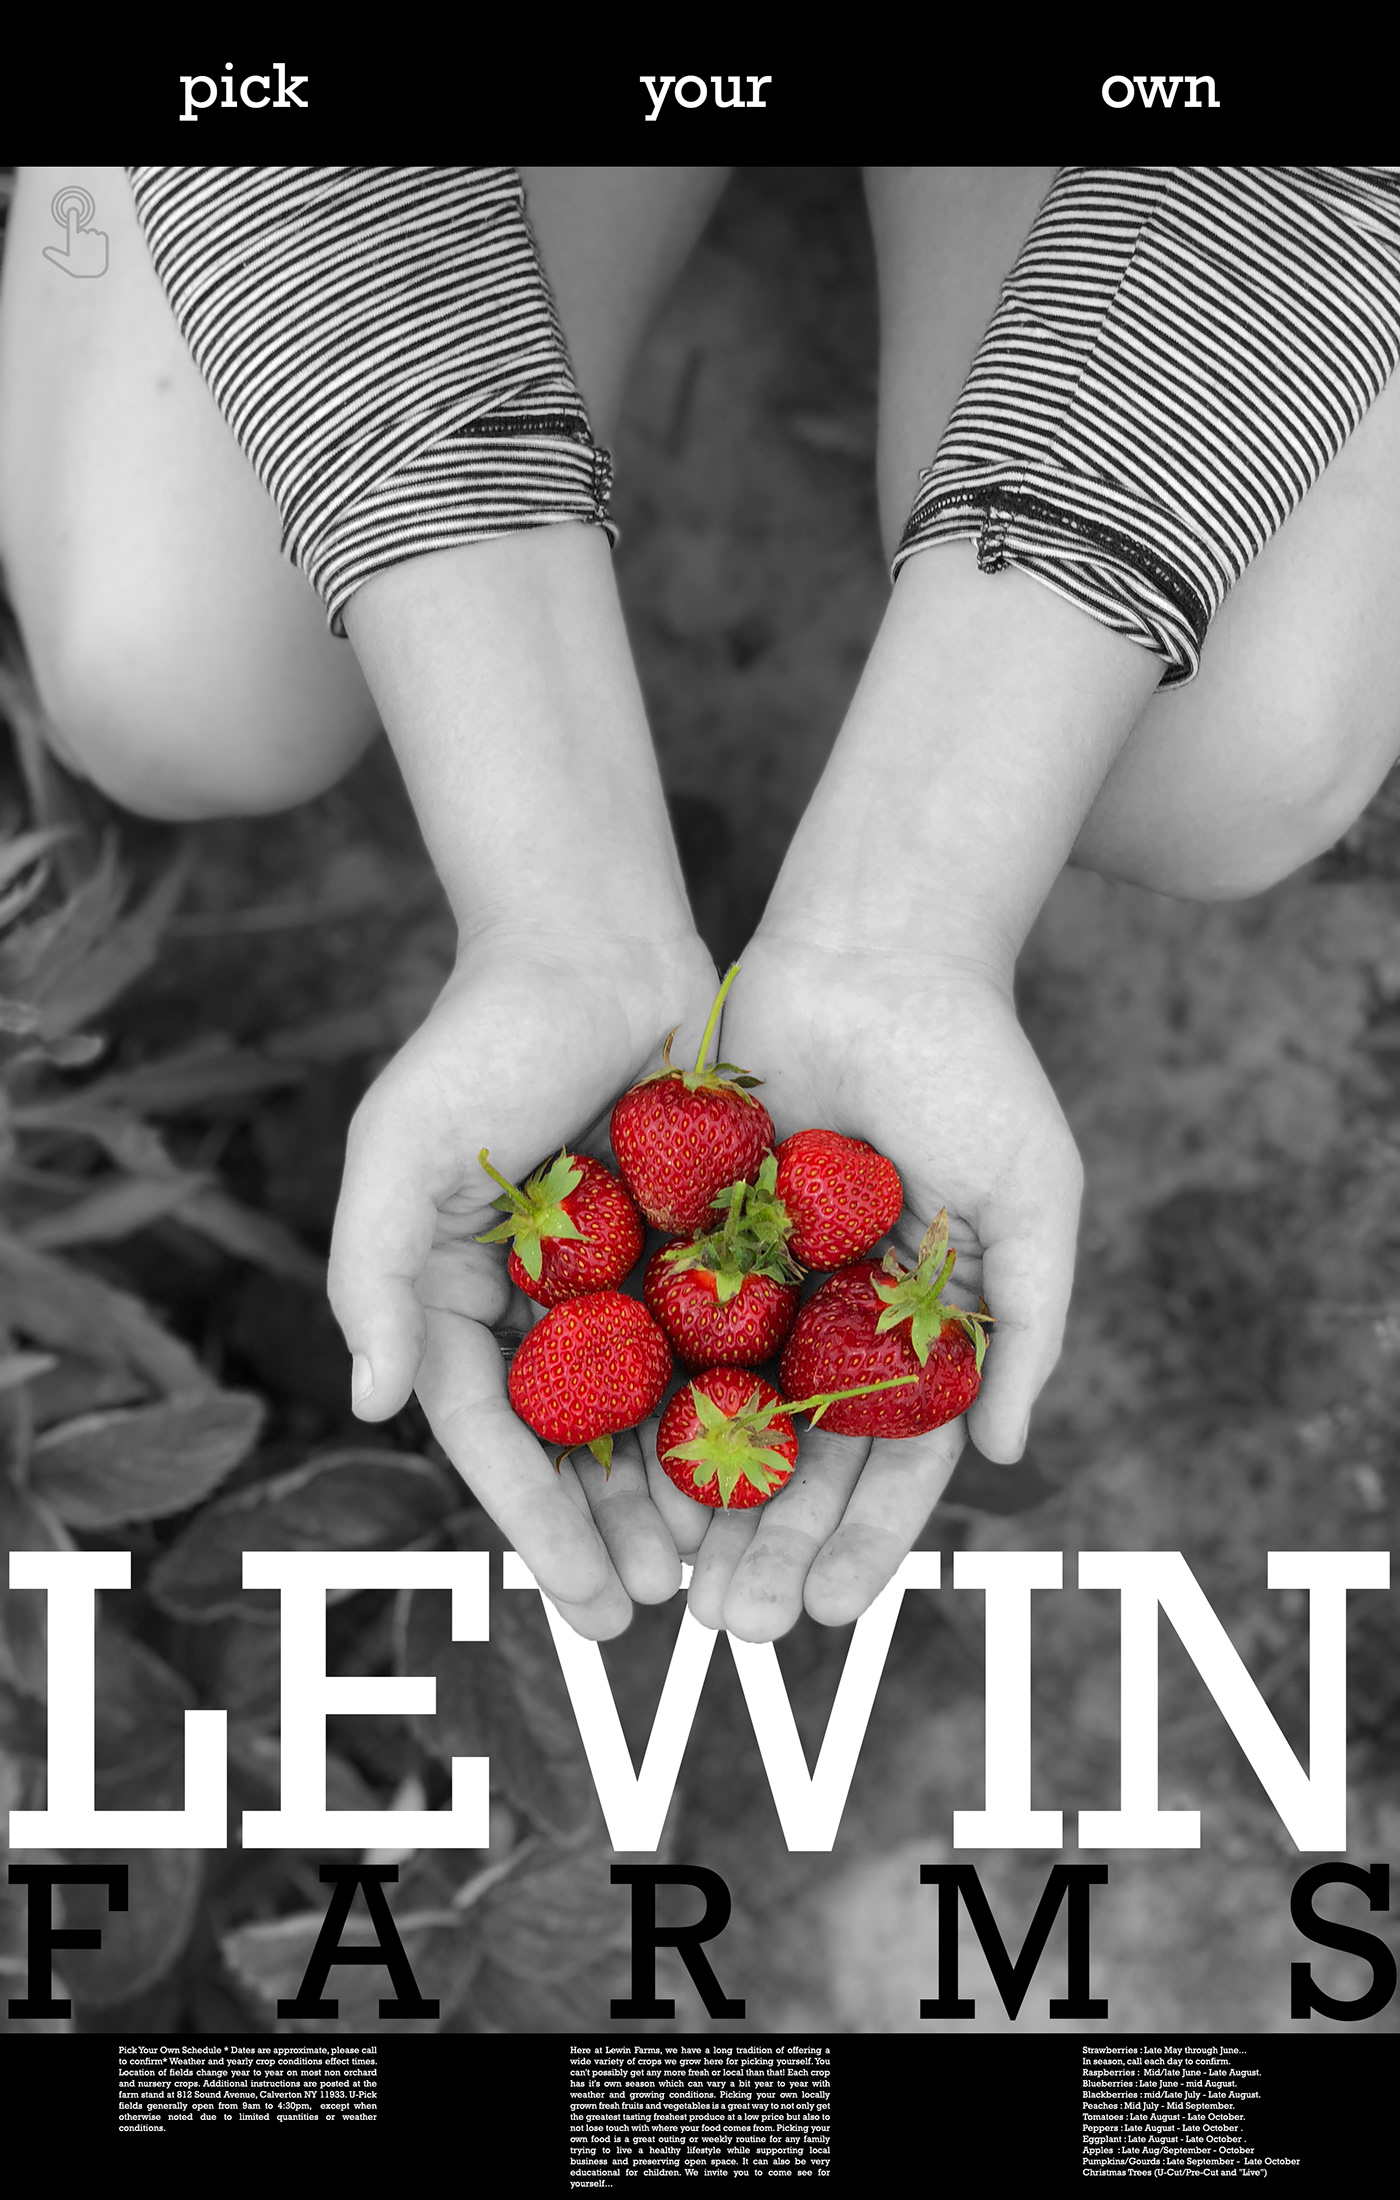 lewin farms advertisement branding  poster flyer strawberries strawberry model photograph Typeface